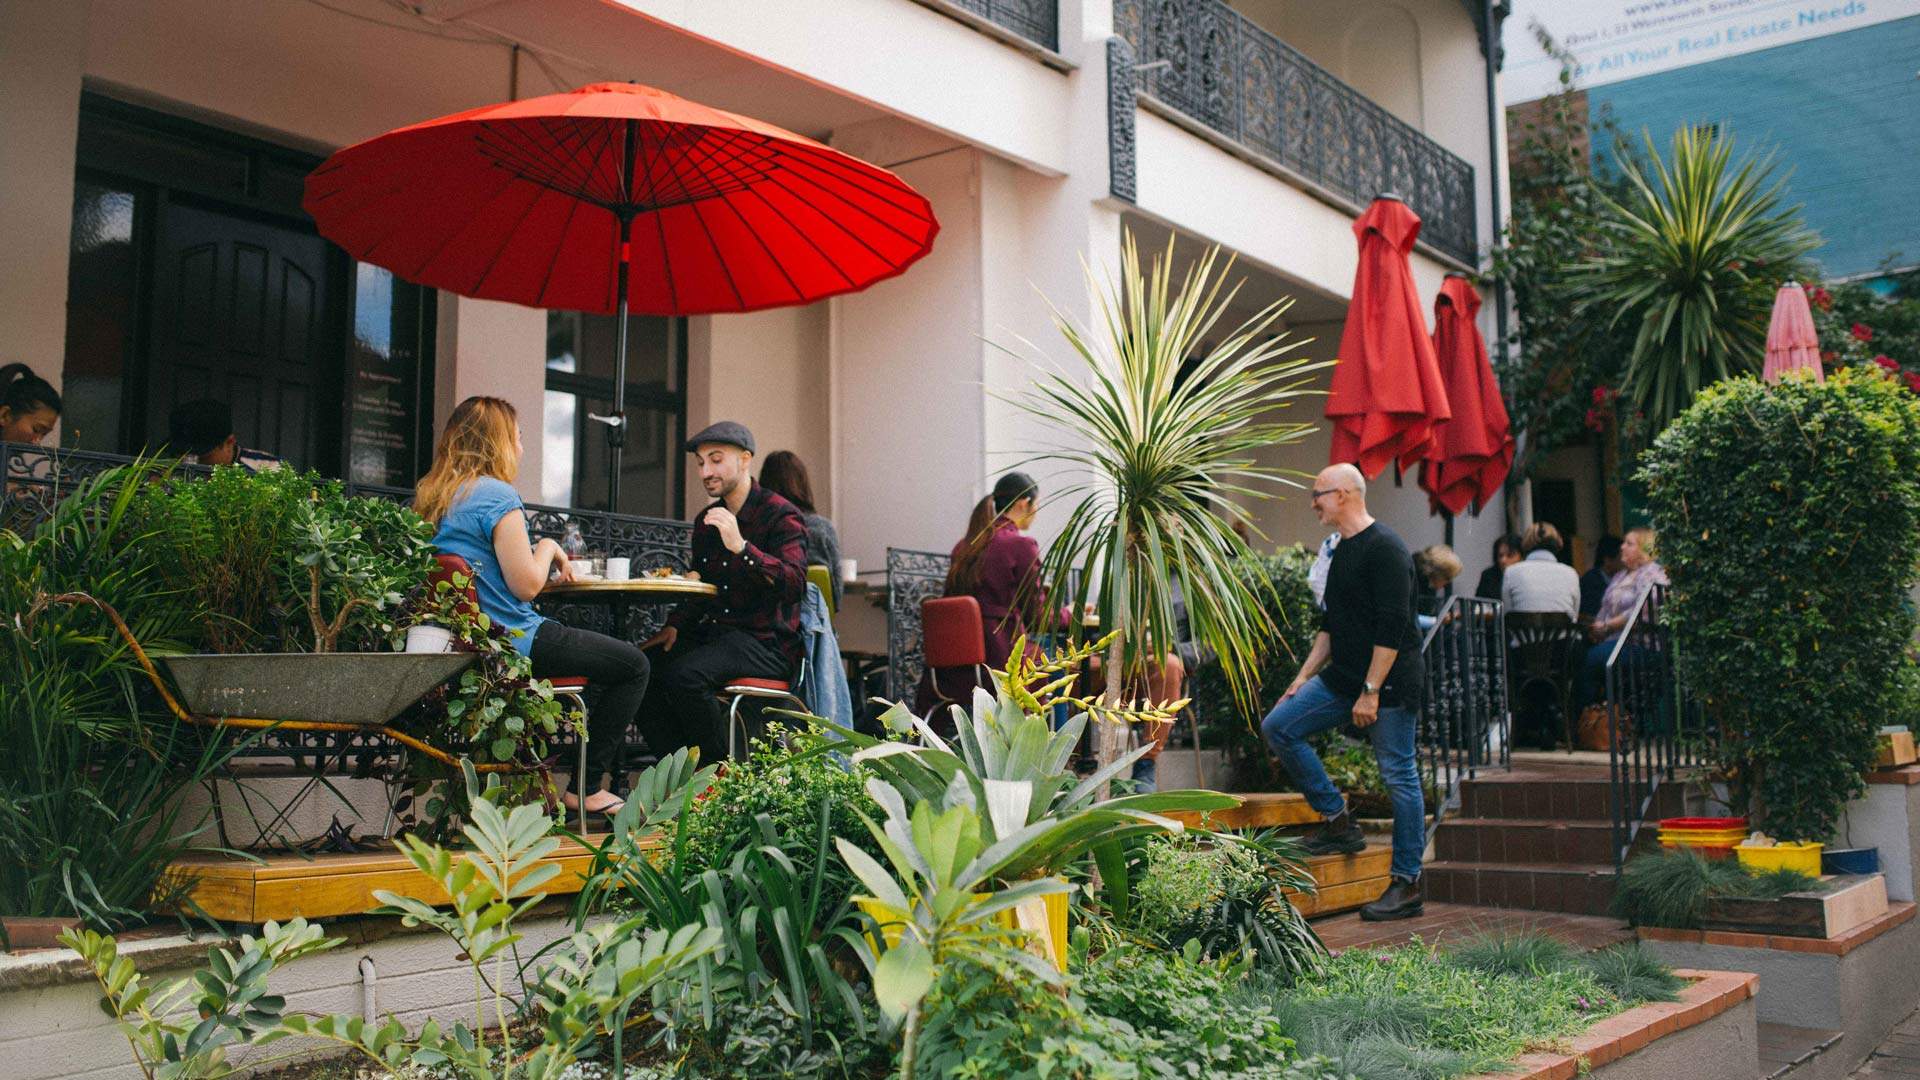 People dining outside under umbrellas at Circa Espresso - - one of the best cafes in Sydney